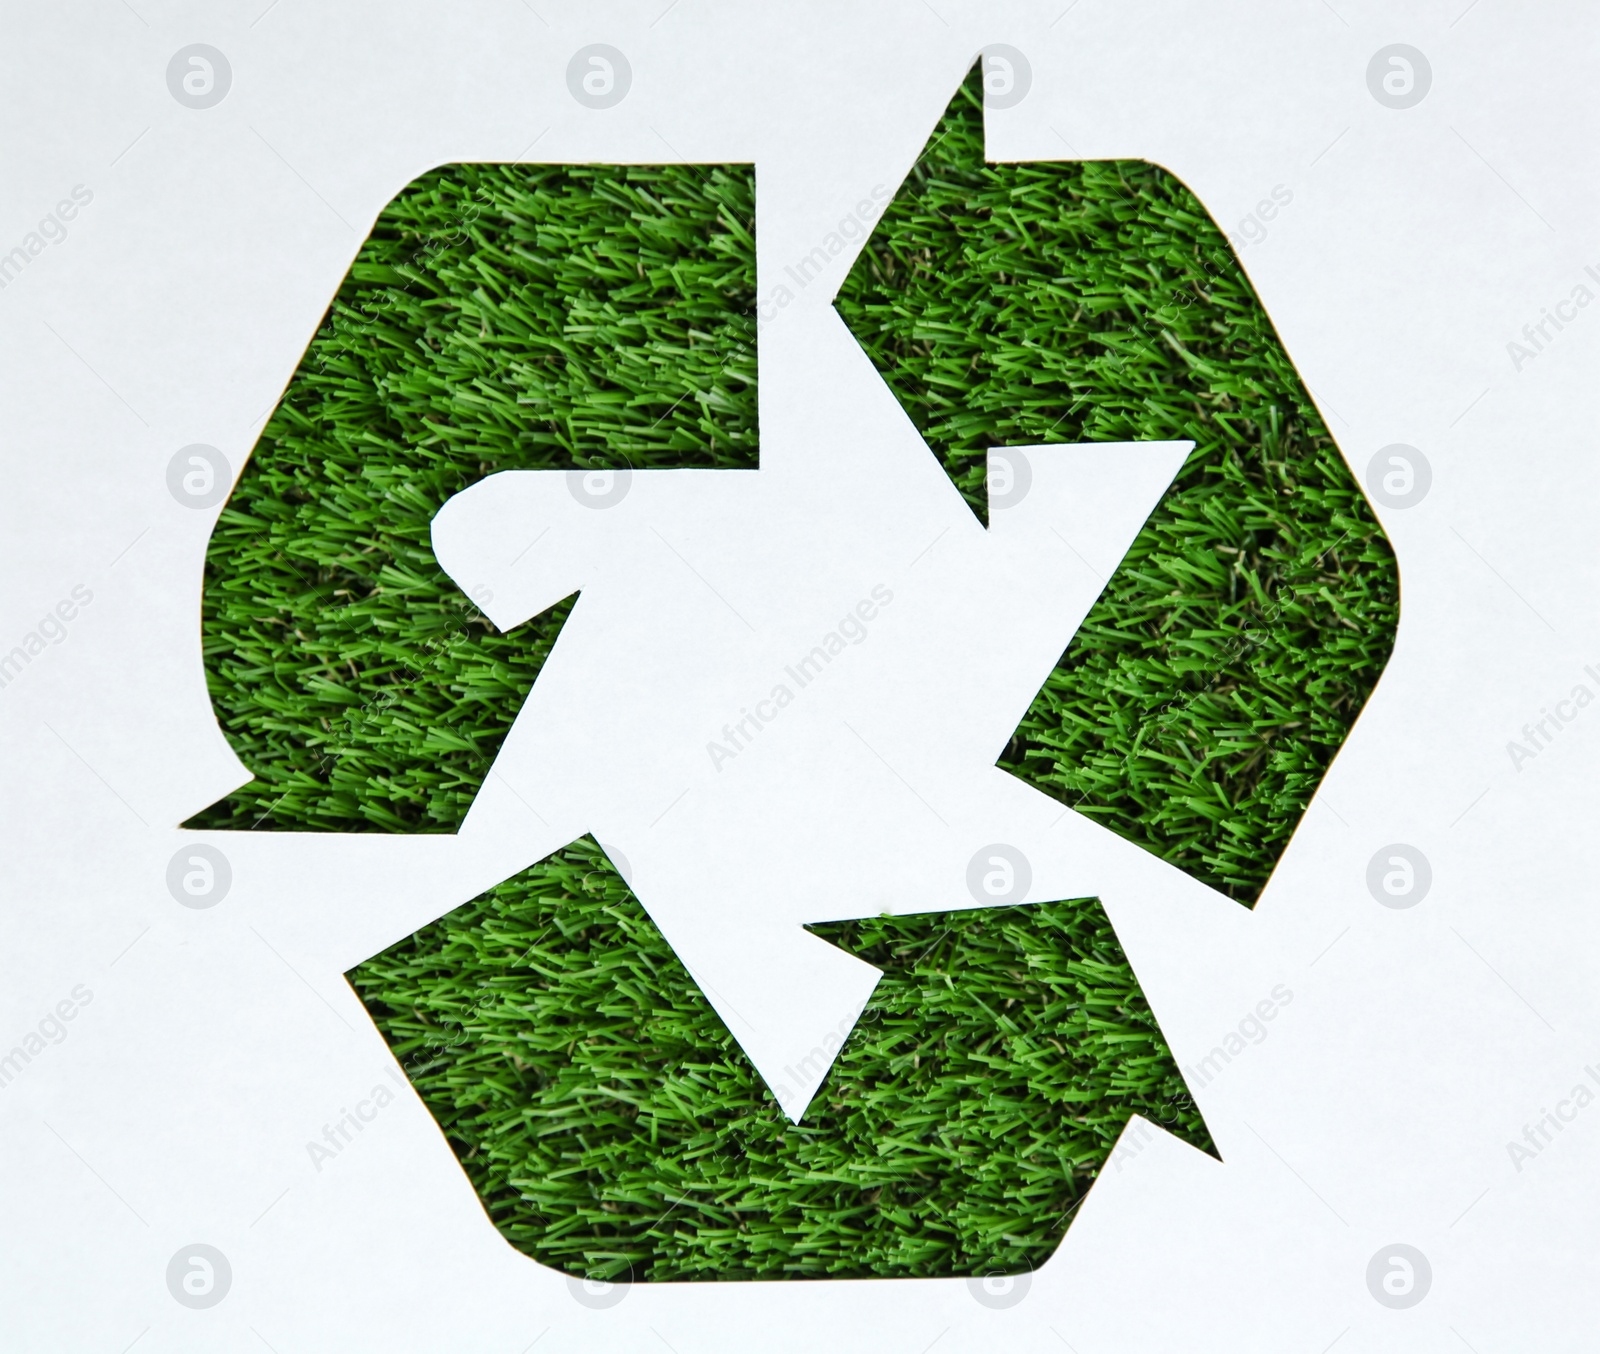 Photo of Sheet of paper with cutout recycling symbol on green grass, top view